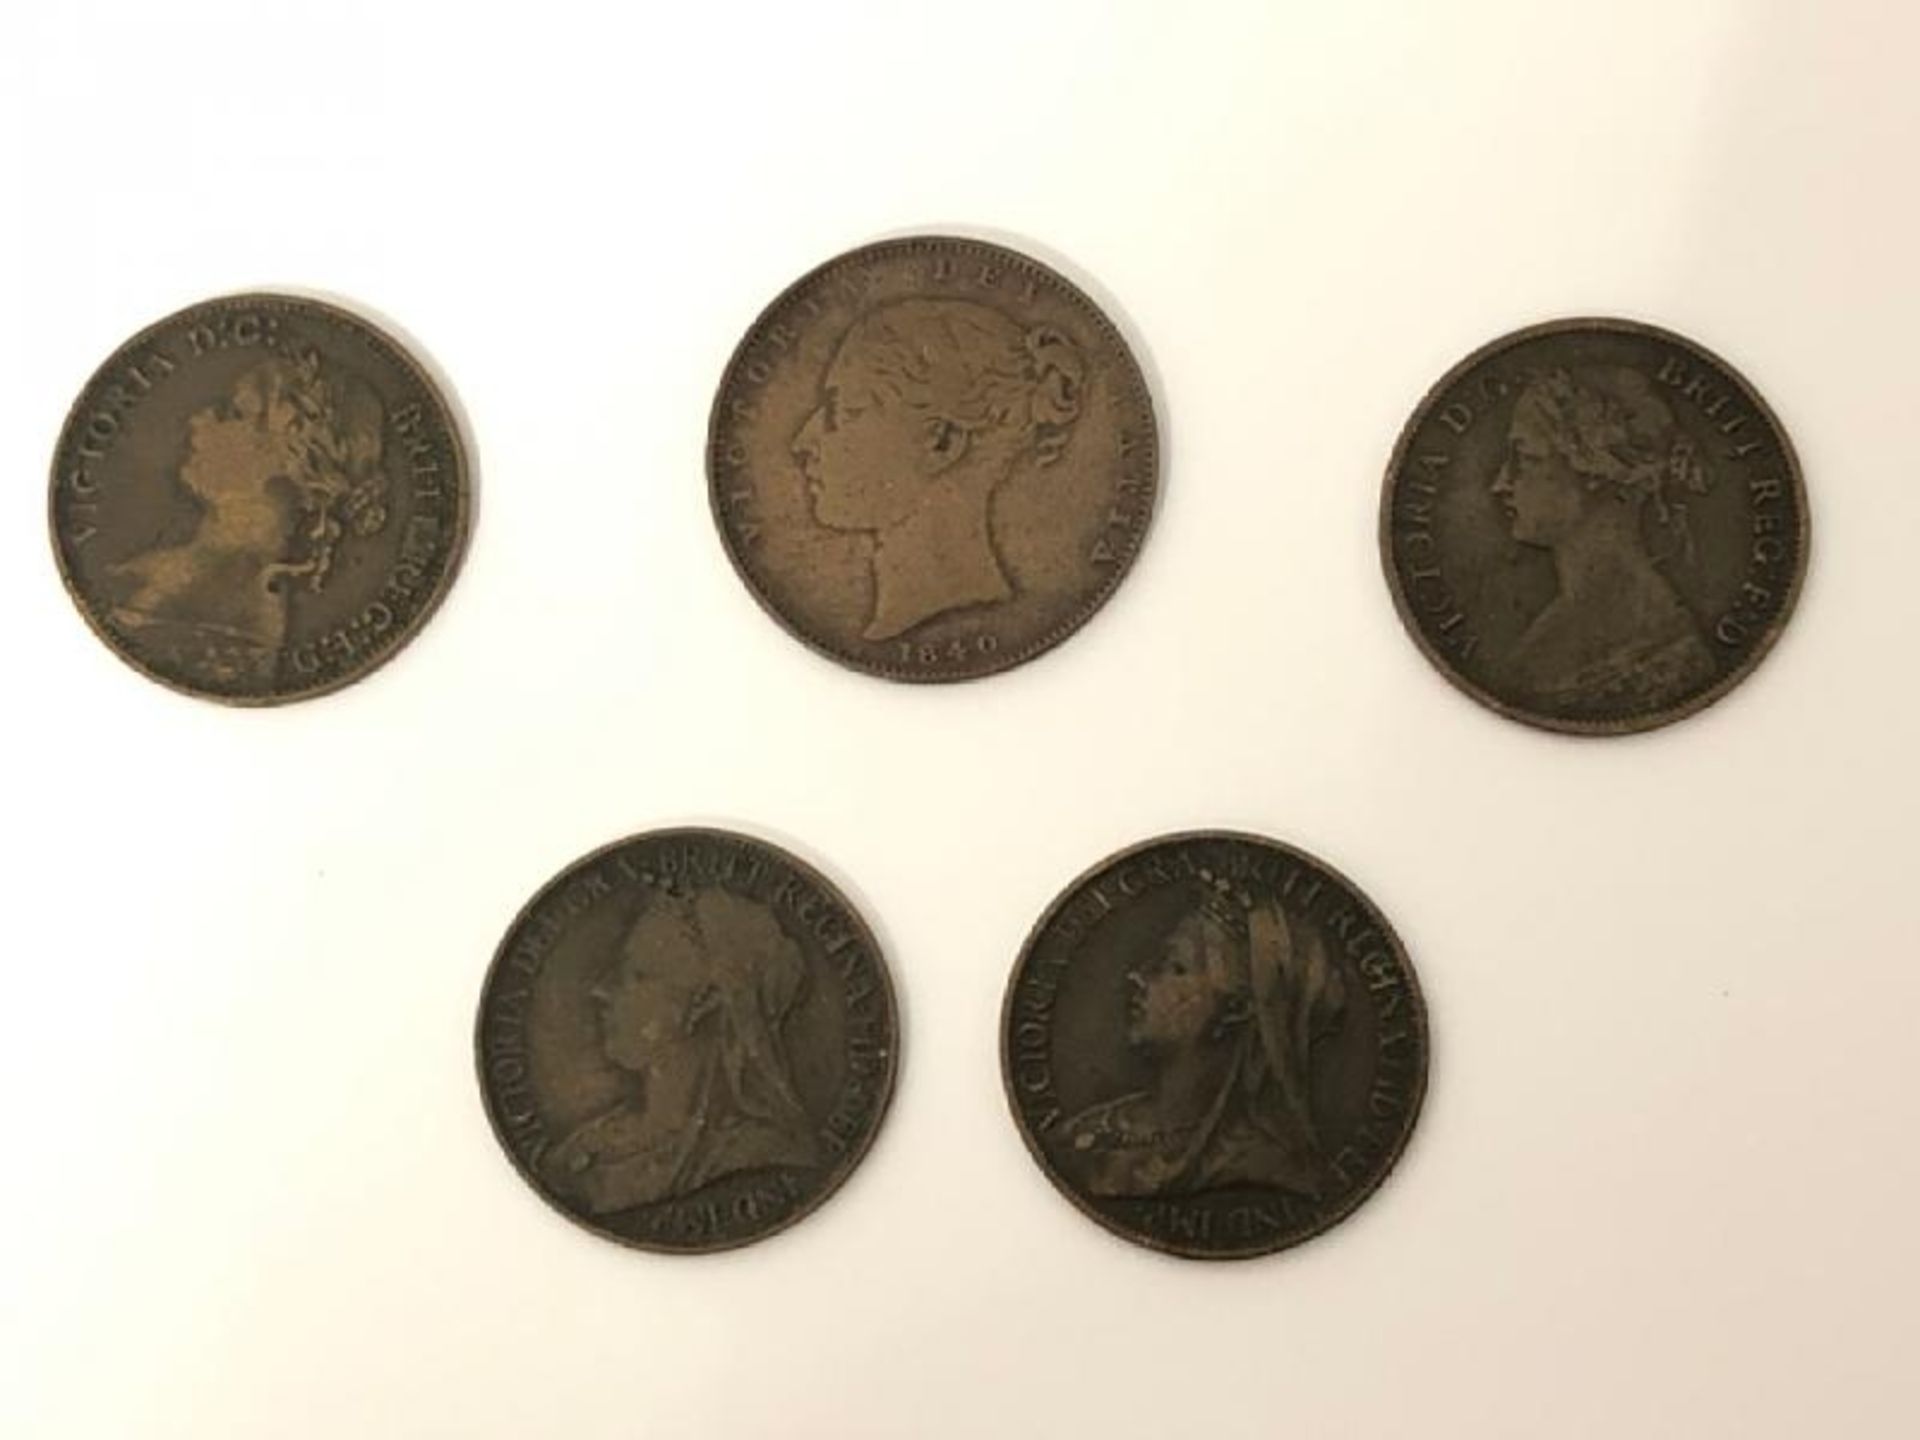 Five Queen Victoria coins dated 1840, 1879, 1862, 1898 and 1900 with five Edward VII coins / AN9 - Image 2 of 7